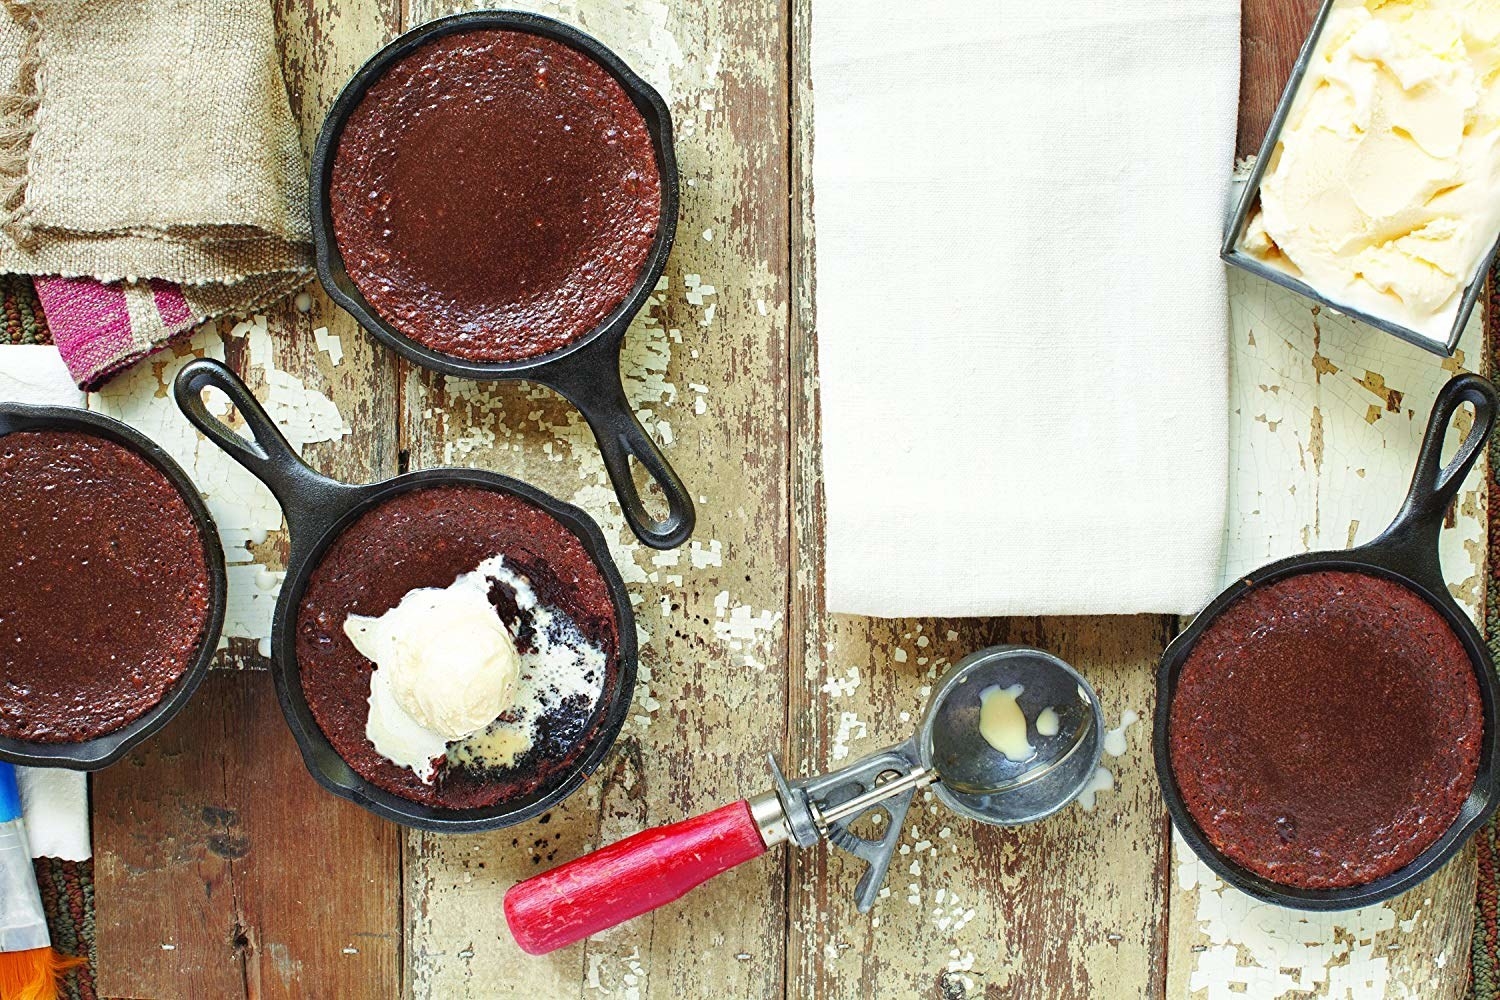 mini cast iron skillets filled with brownies